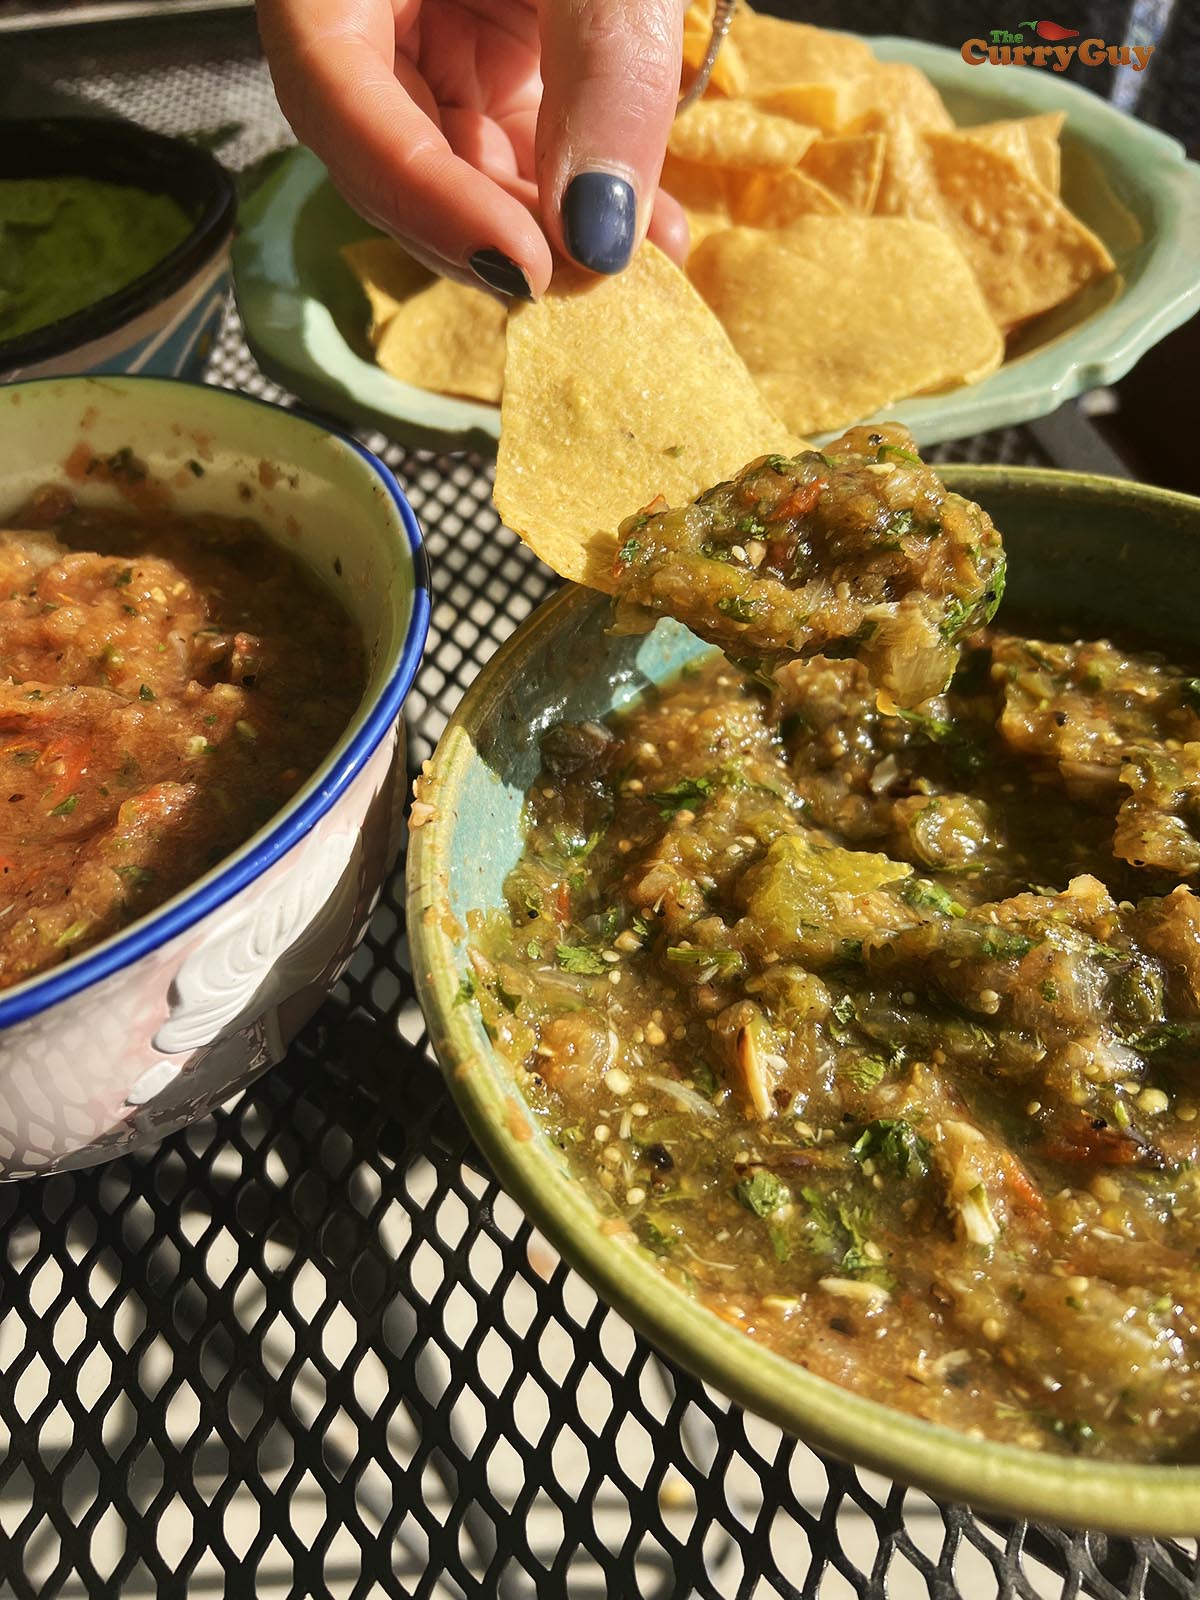 Tomatillo and tomato salsa served with corn chips and other salsas.